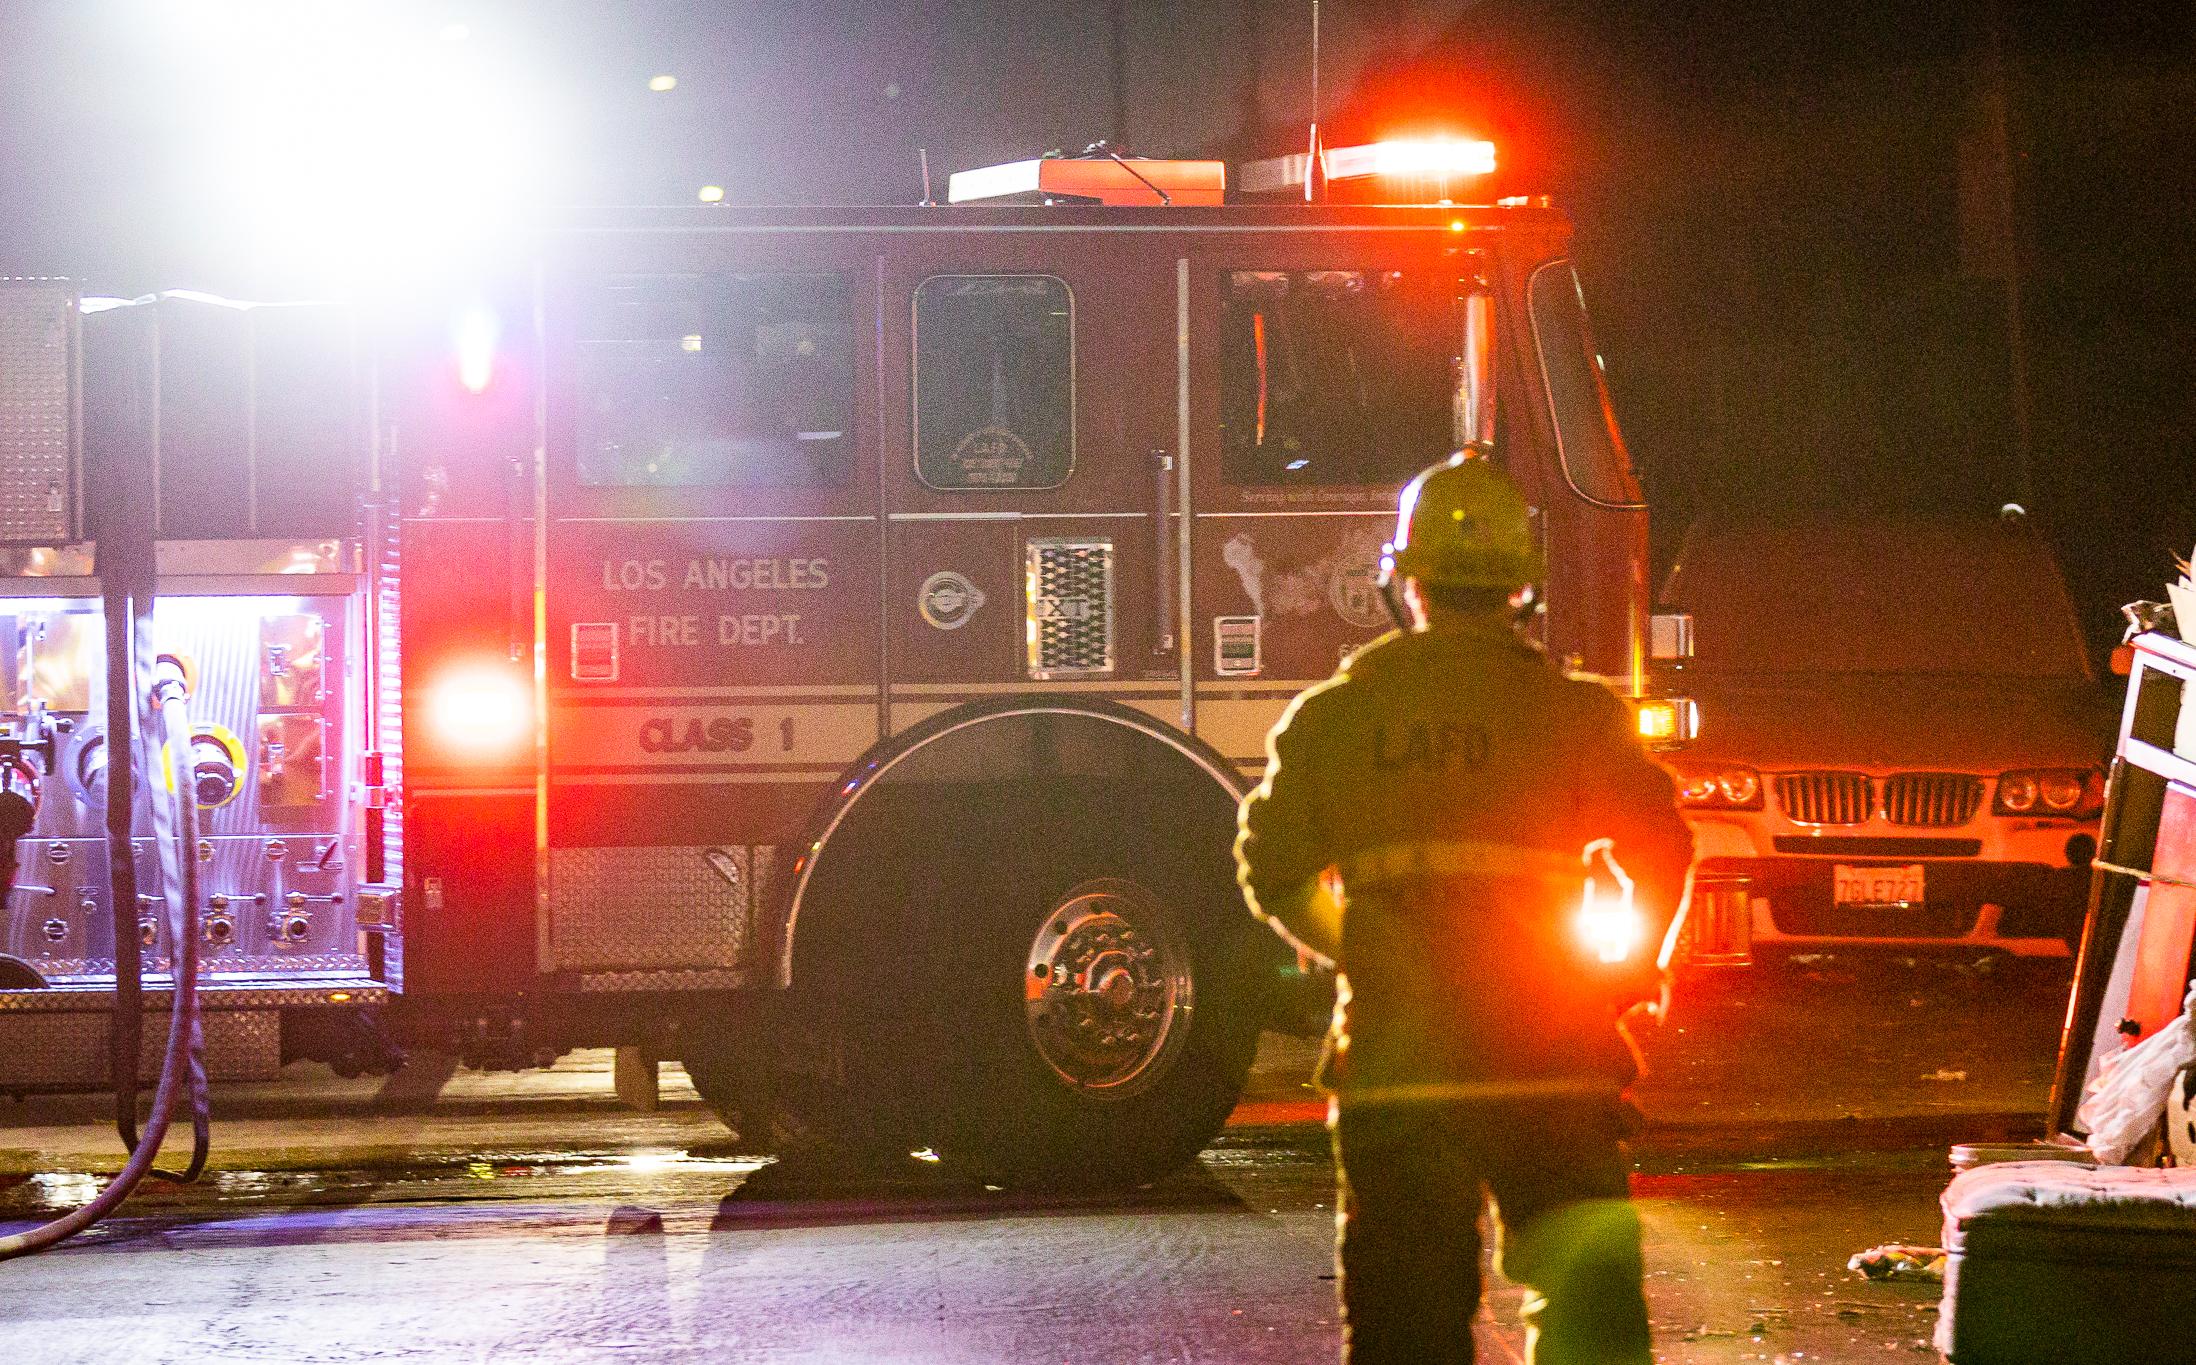 Person Found Dead in Debris of Fire at Los Angeles Homes Containing ‘Heavy Ammunition’